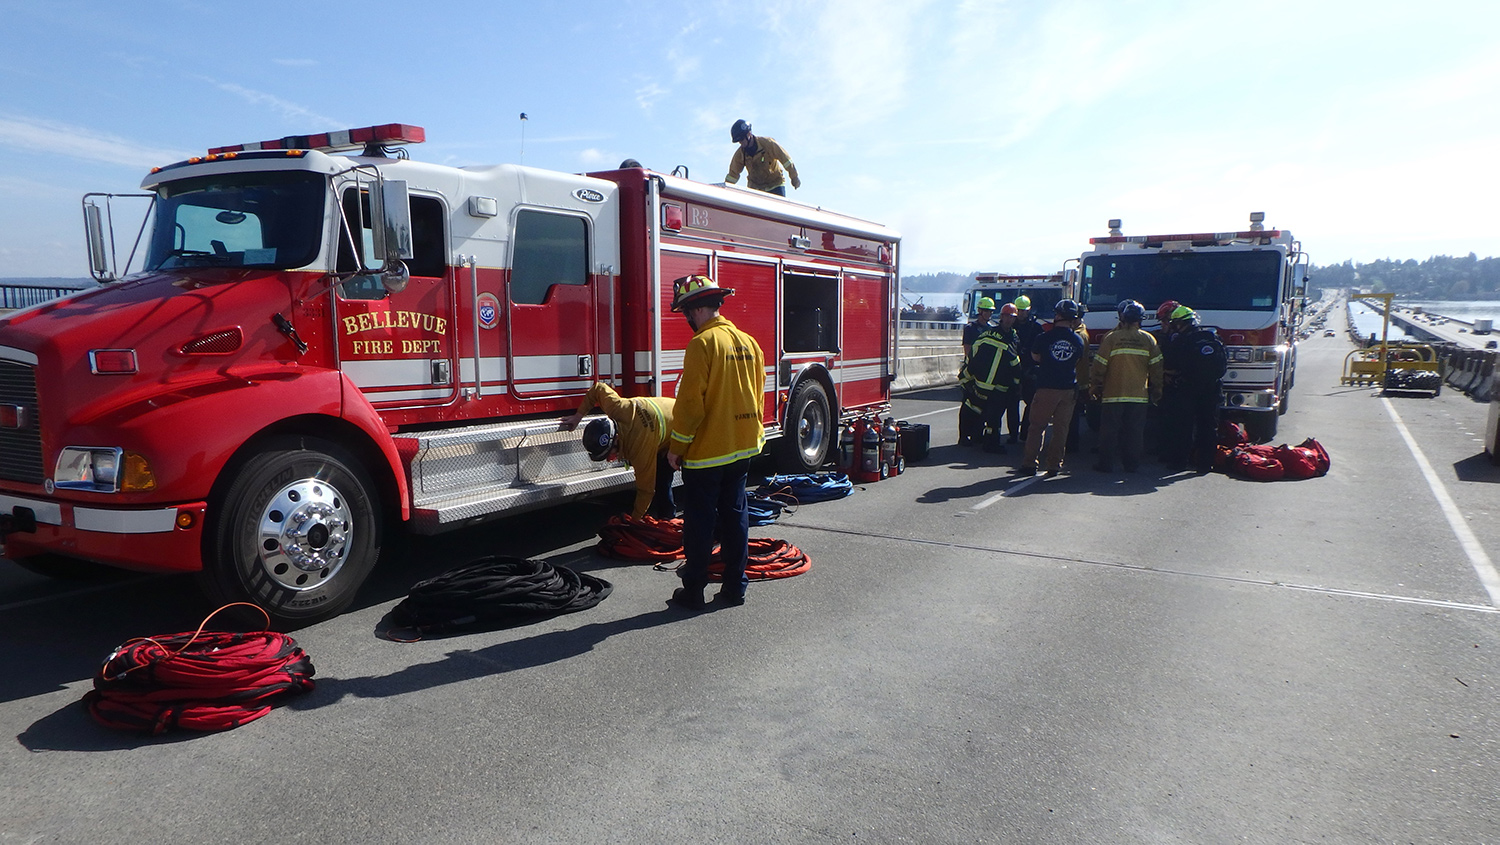 City of Bellevue Fire Department practices rescue drills on the floating bridge.